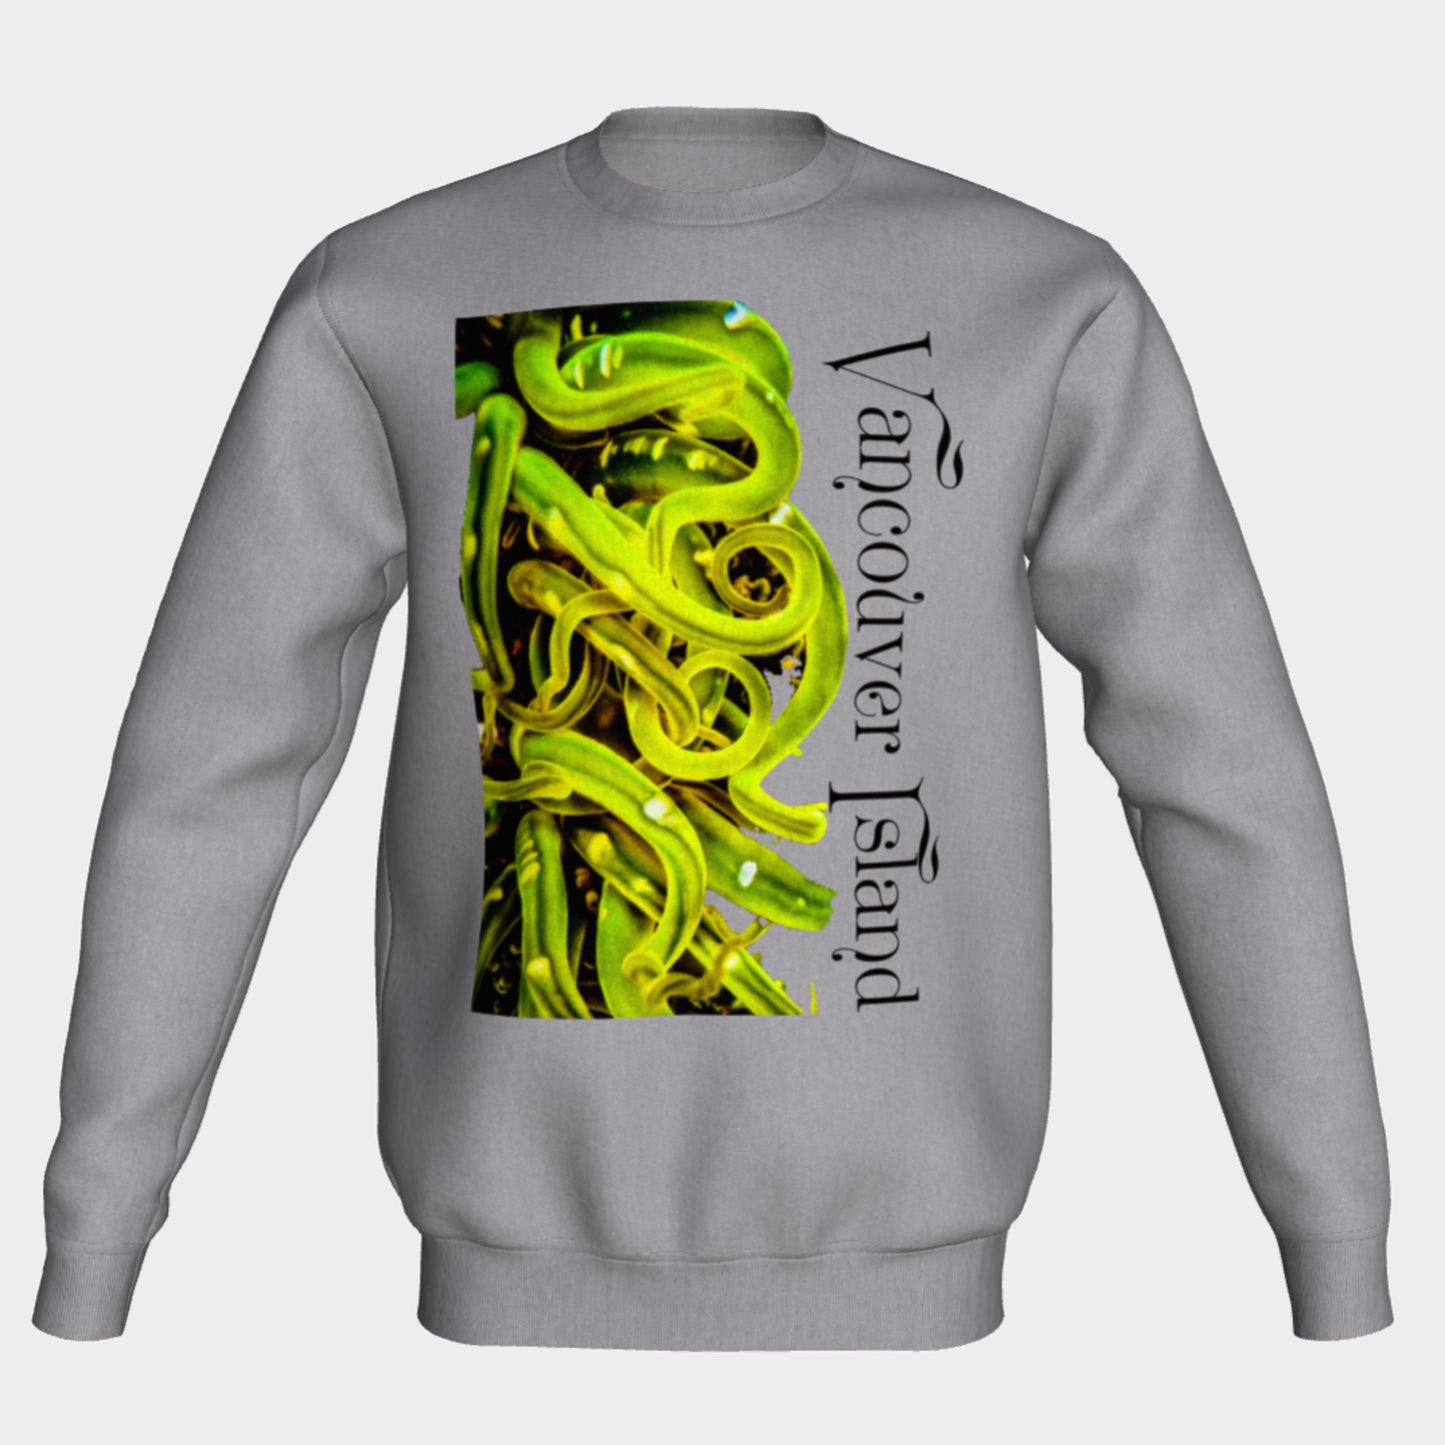 Sea Anemone Vancouver Island Crewneck Sweatshirt What’s better than a super cozy sweatshirt? A super cozy sweatshirt from Van Isle Goddess!  Super cozy unisex sweatshirt for those chilly days.  Excellent for men or women.   Fit is roomy and comfortable. 